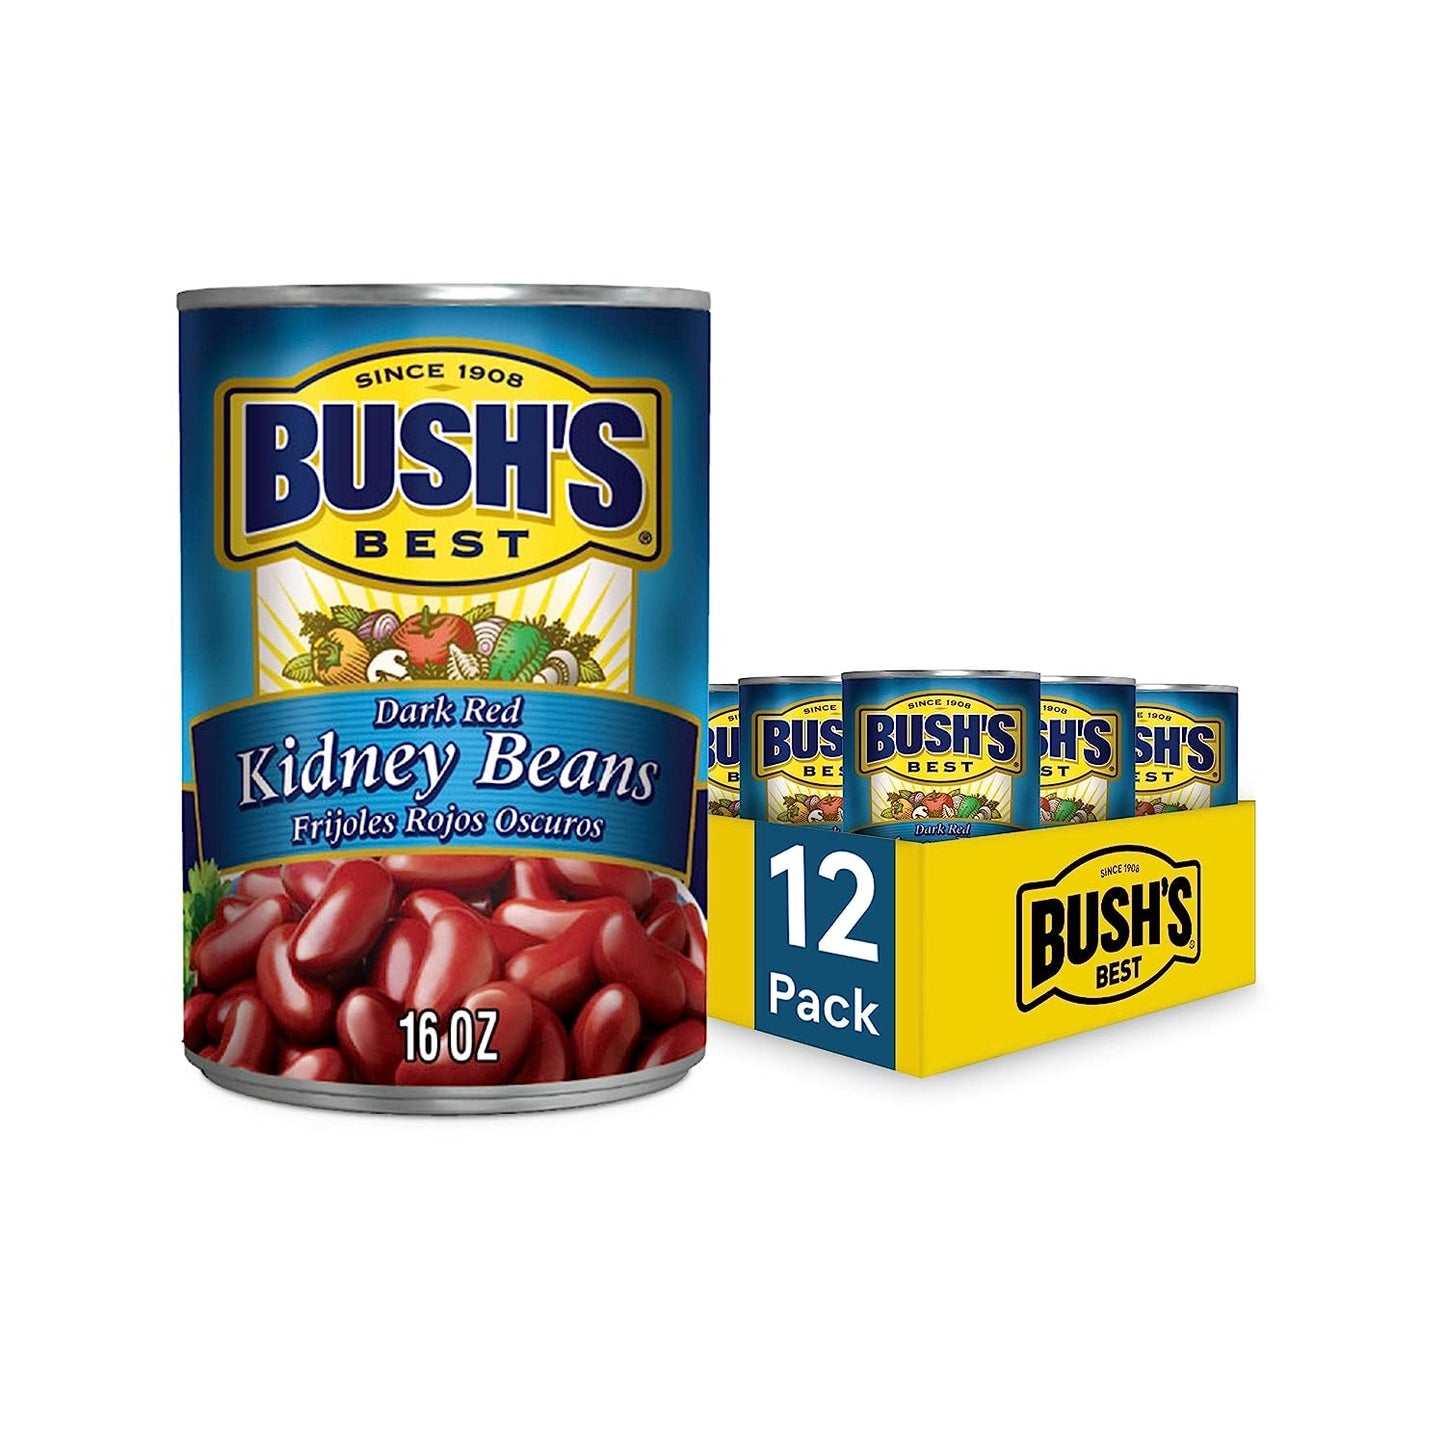 Bush's Best Canned Dark Red Kidney Beans, Source of Plant Based Protein and Fiber, Low Fat, Gluten Free, 16 oz (Pack of 12)